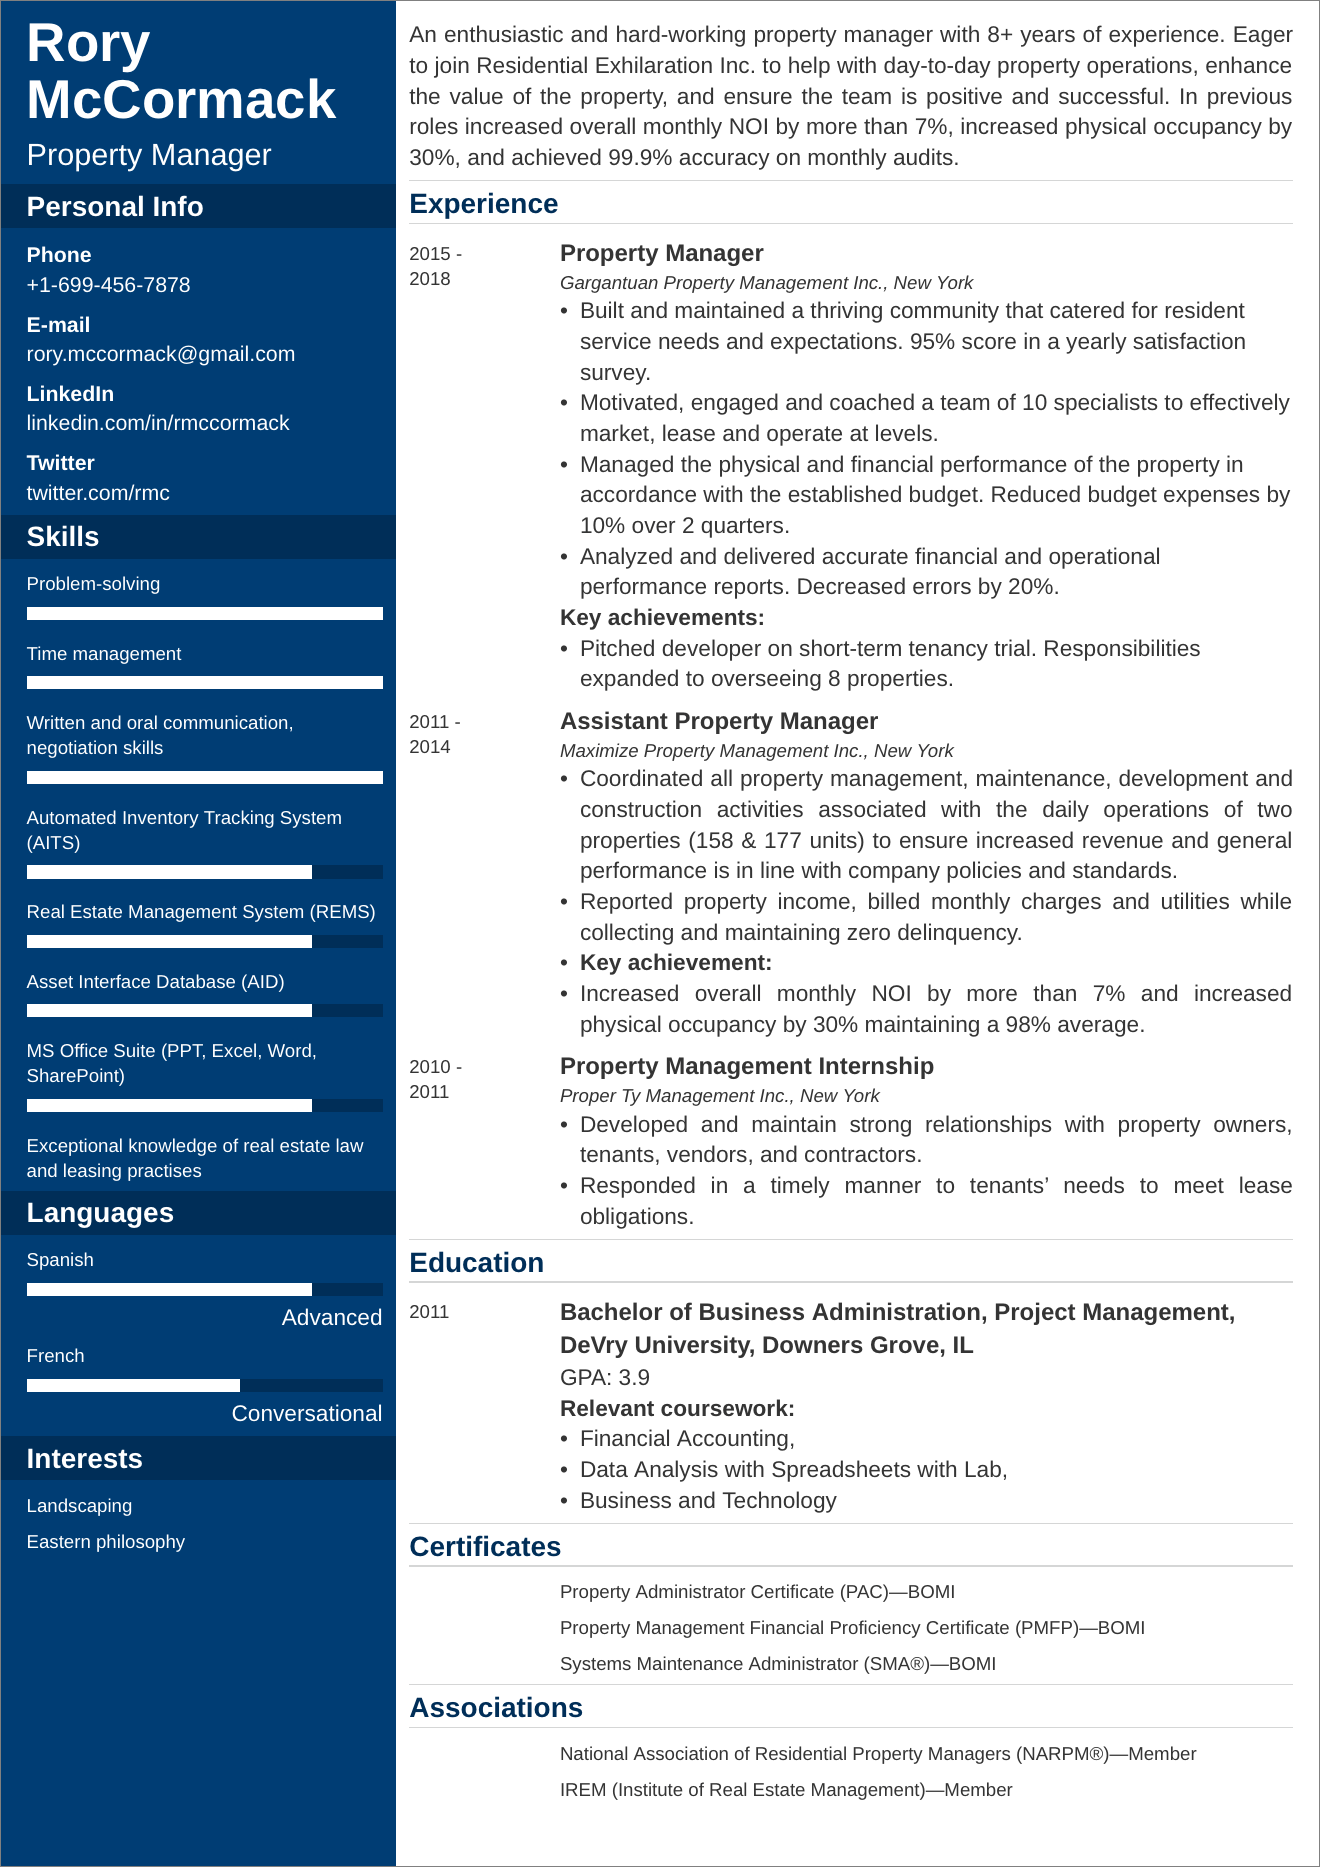 Property Manager Resume Sample: 25+ Examples and Writing Tips